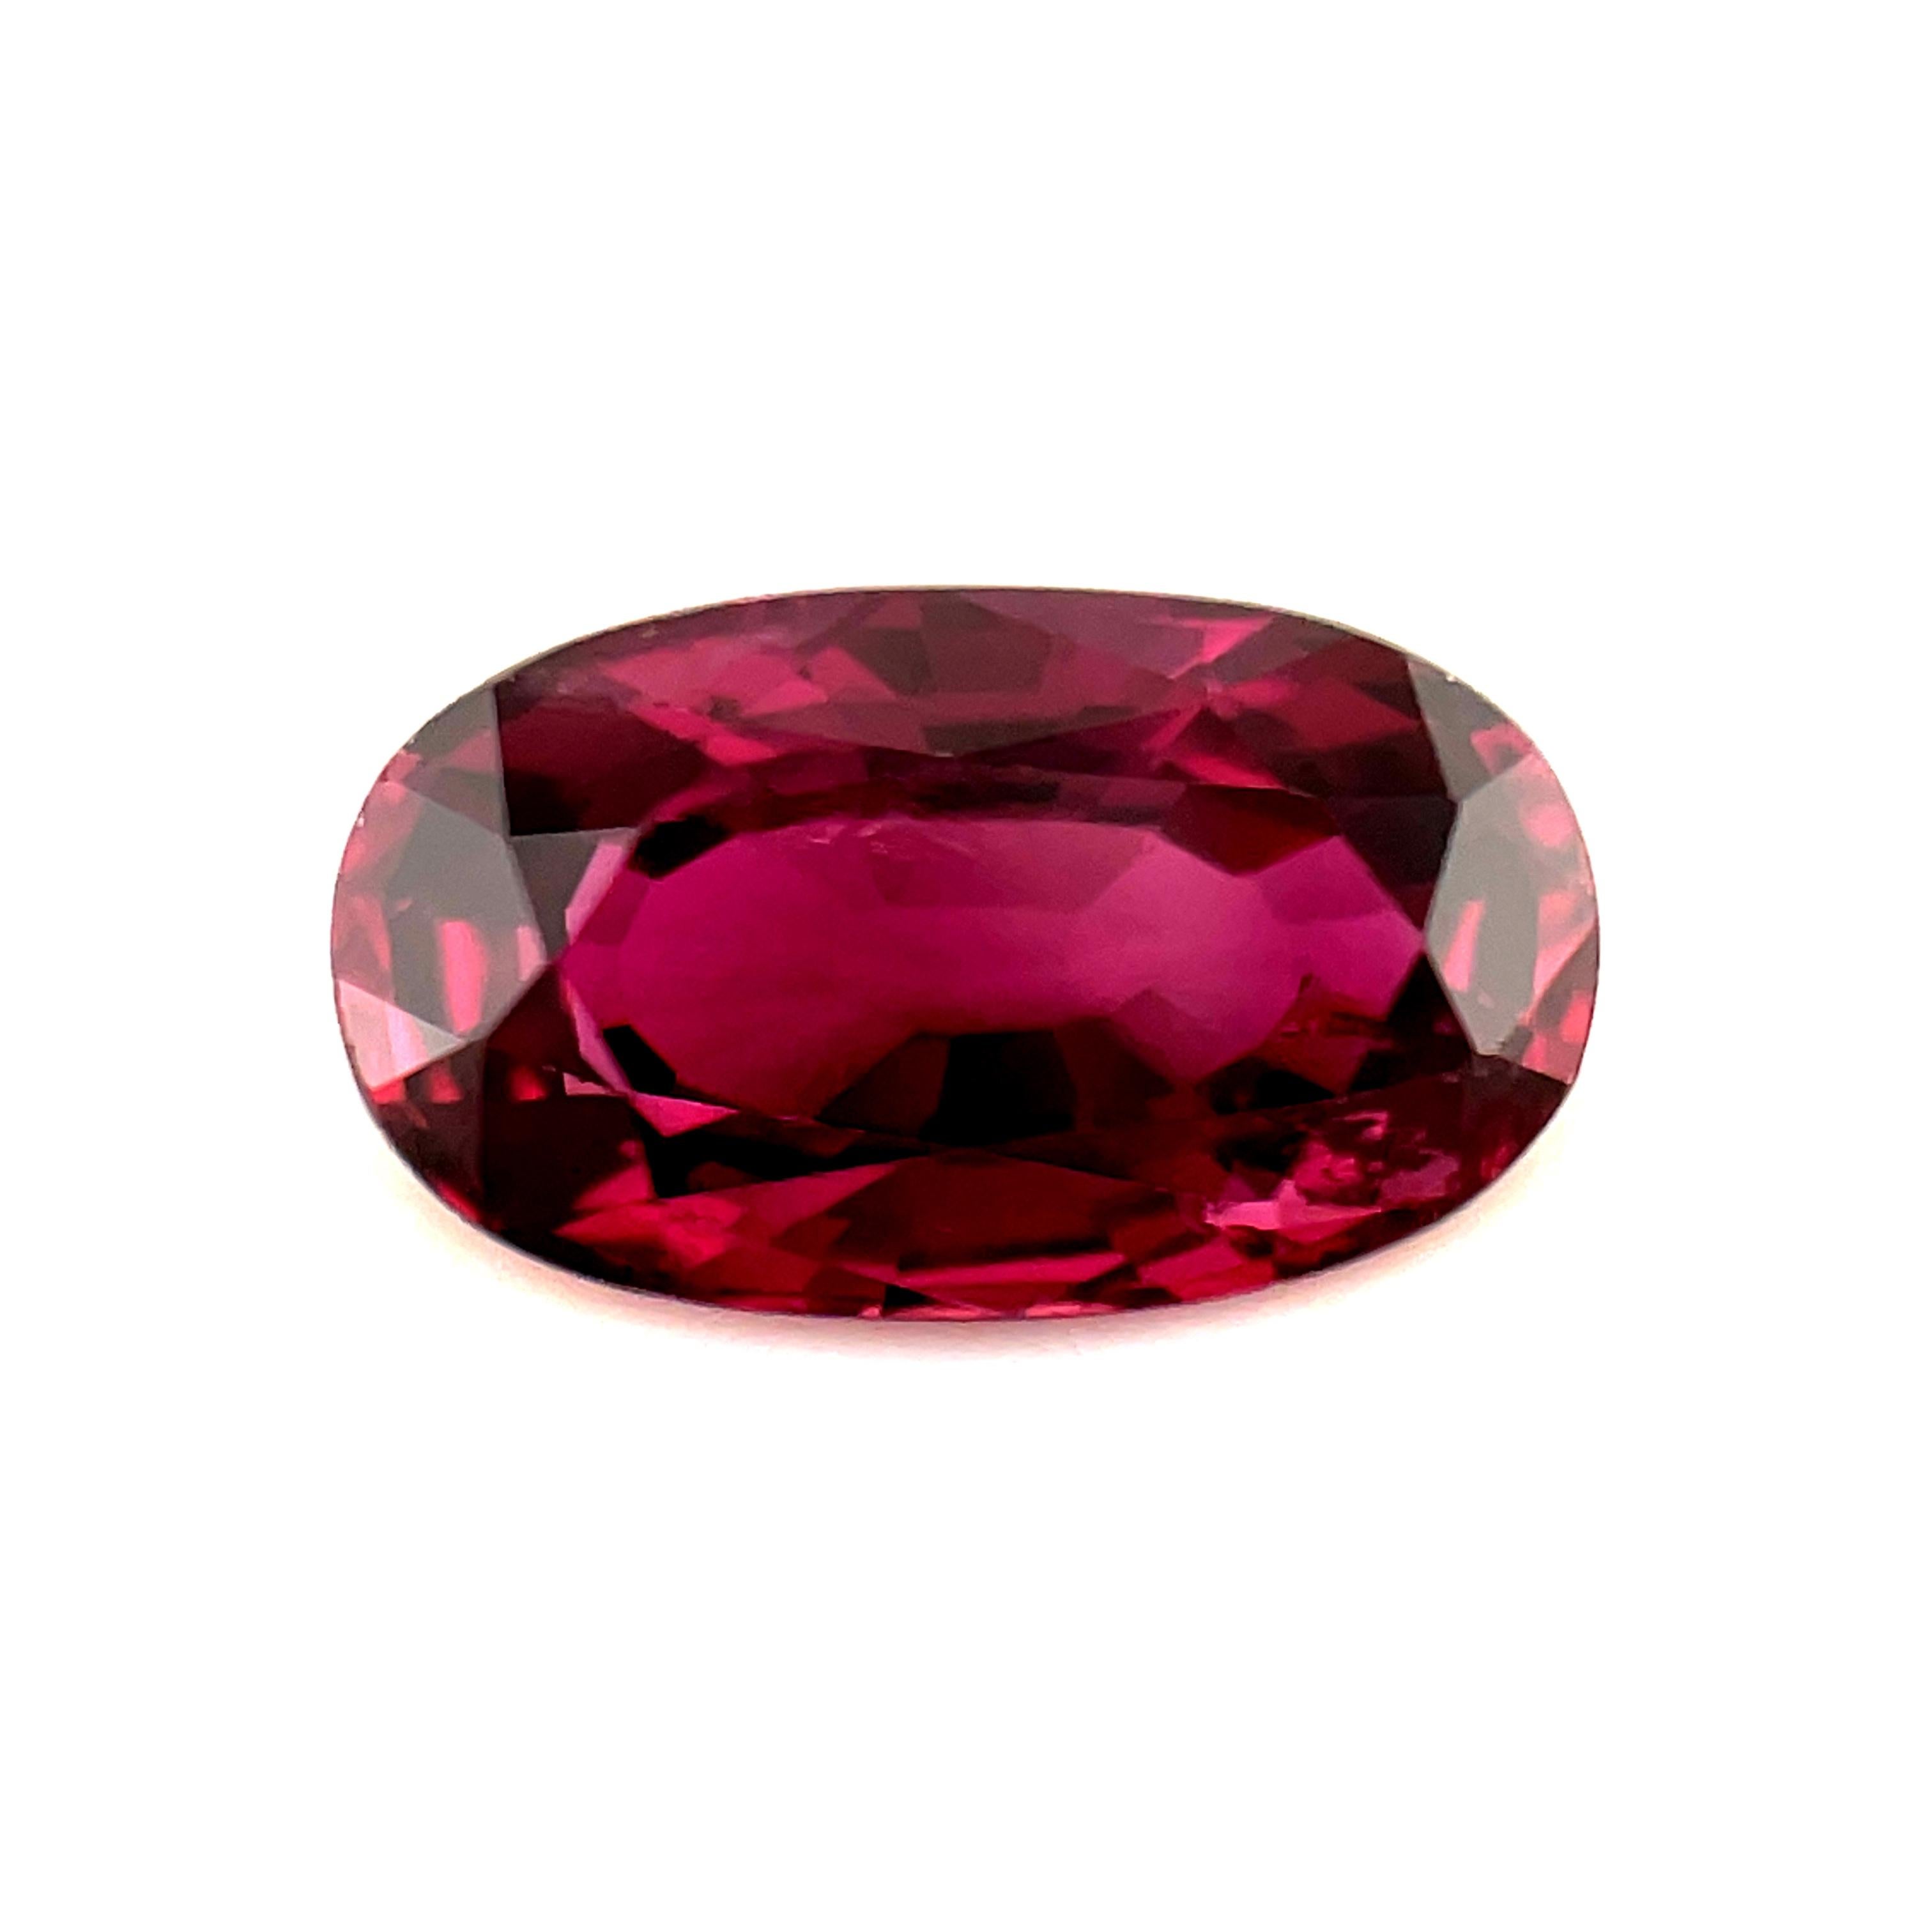 Women's or Men's Loose Ruby Gemstone for Engagement or 3-Stone Ring, 1.46 Carat Oval  For Sale